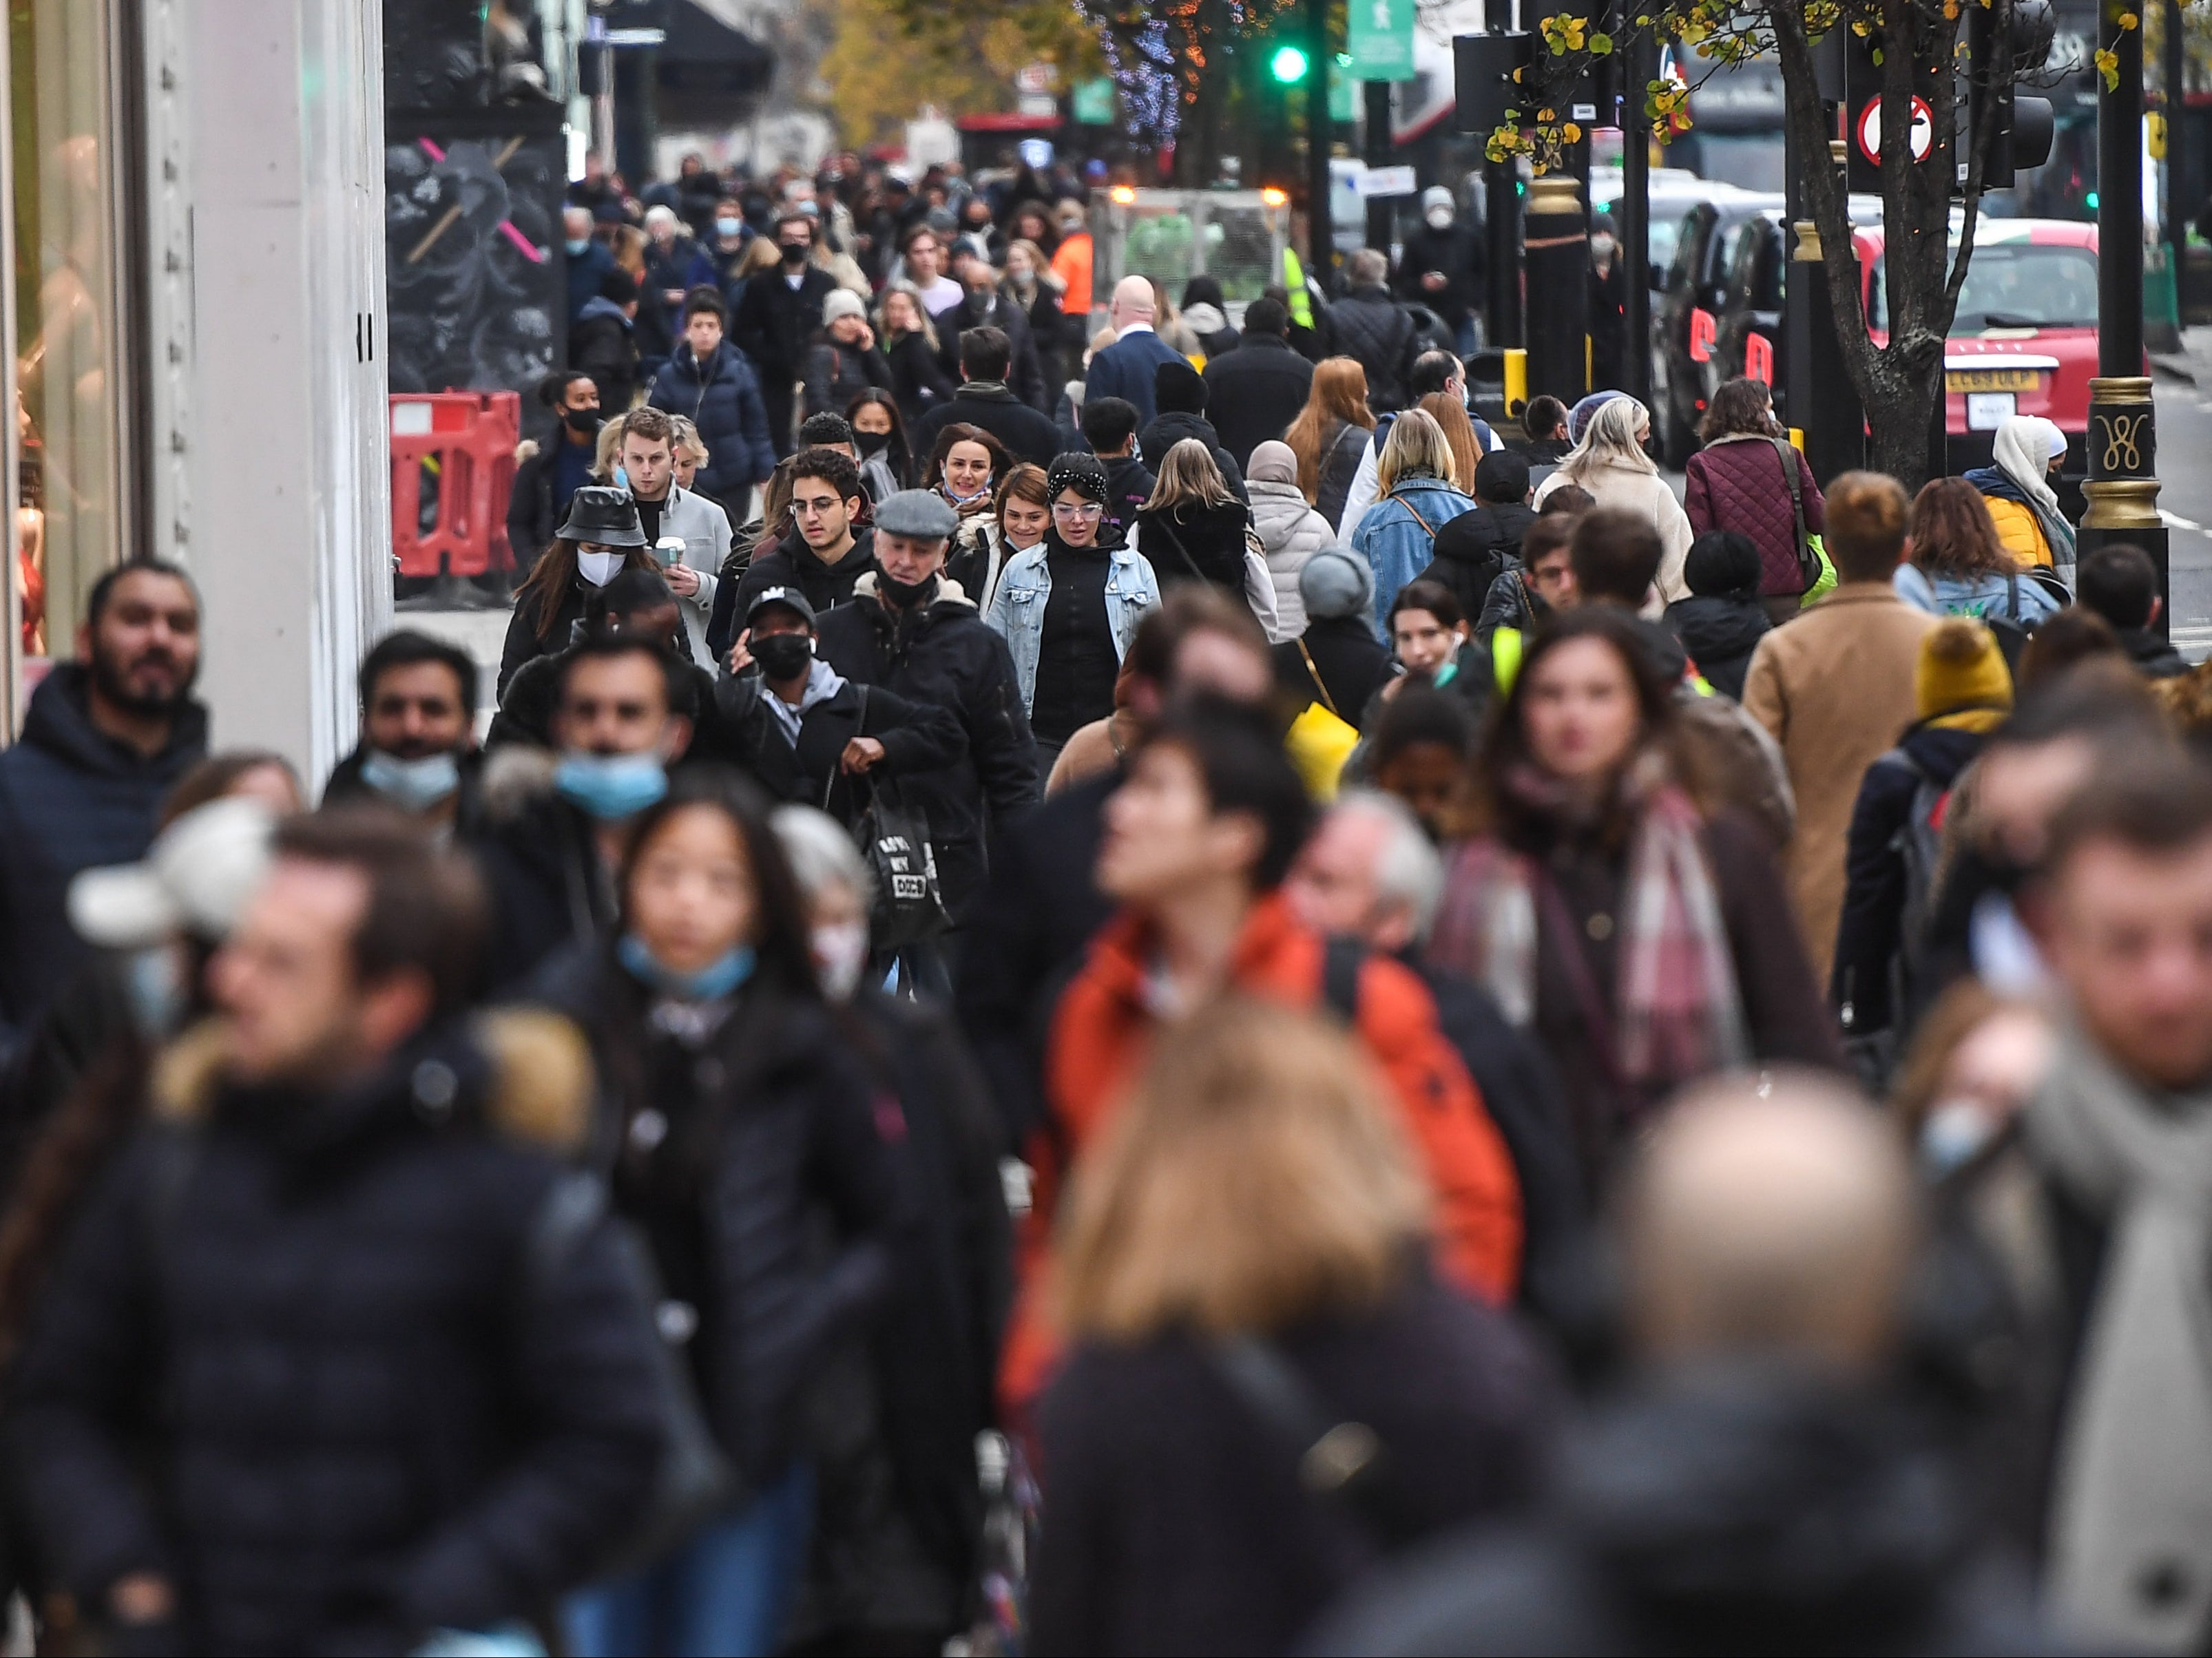 Crowds of shoppers on Oxford Street after lockdown